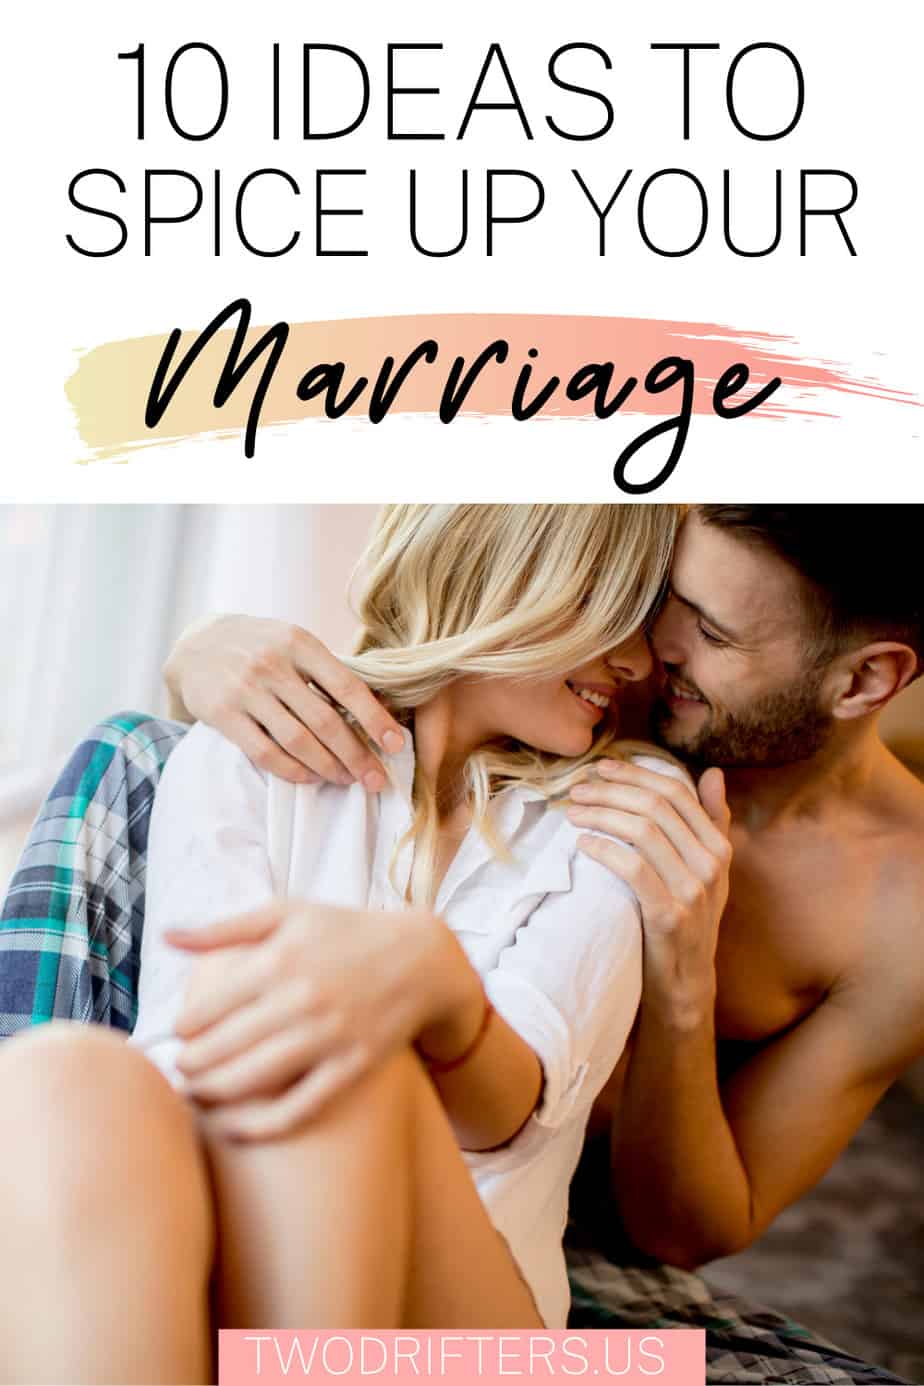 Pinterest social image that says “10 ideas to spice up your marriage.”